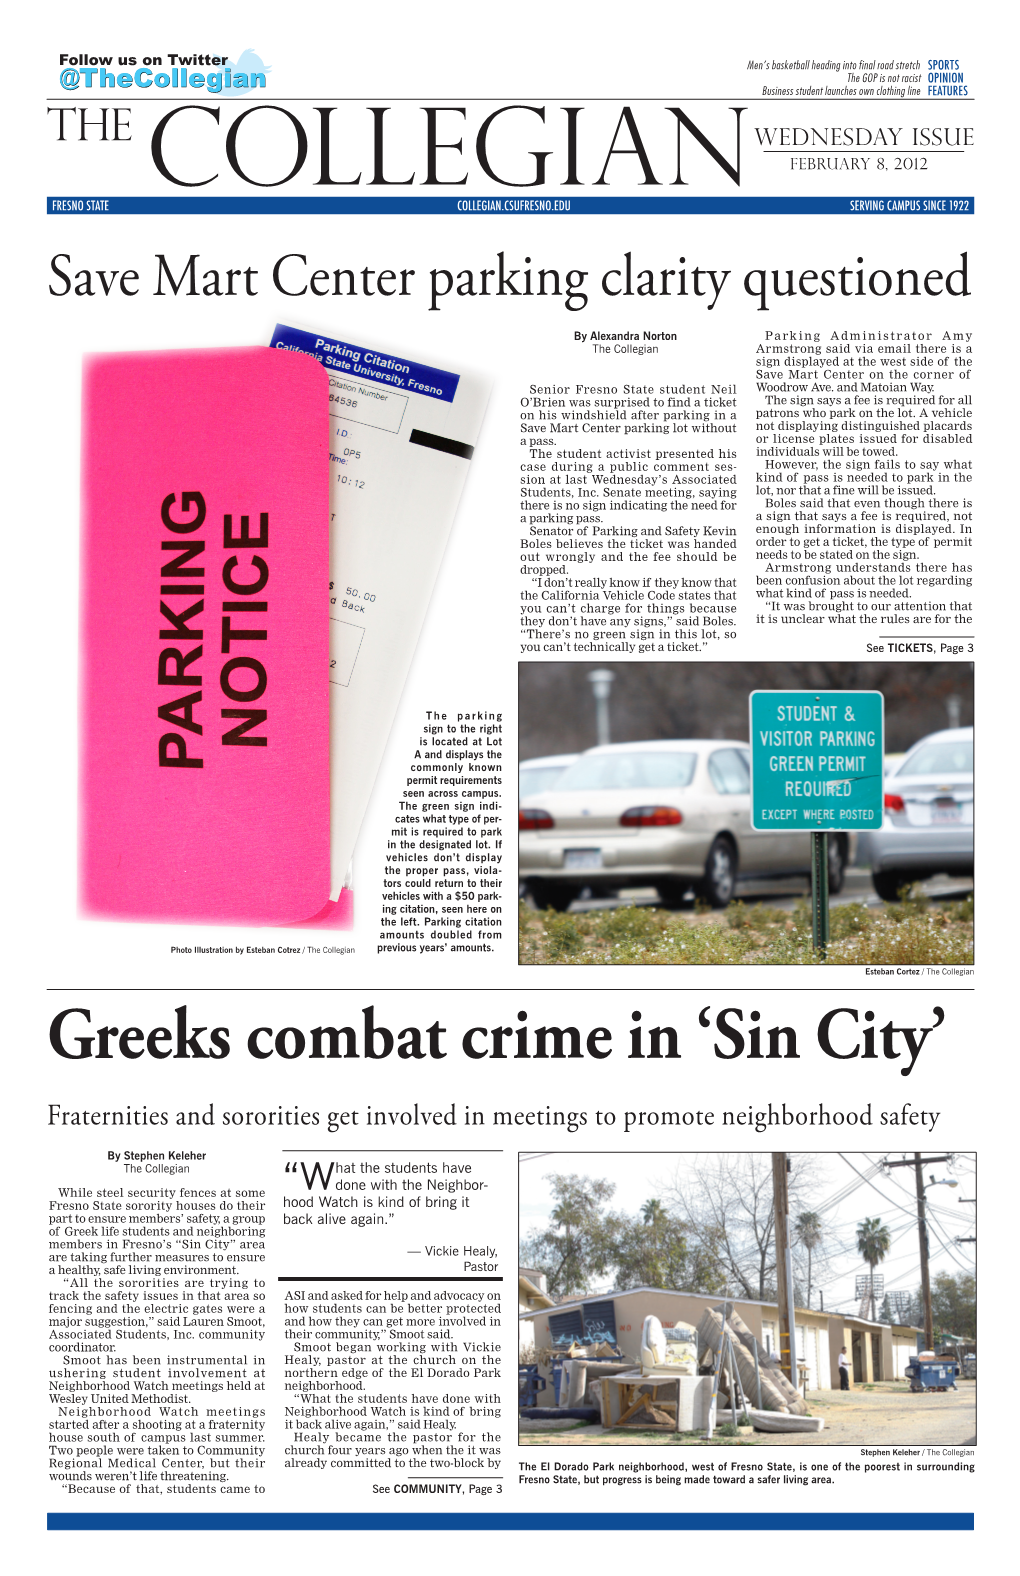 Greeks Combat Crime in ‘Sin City’ Fraternities and Sororities Get Involved in Meetings to Promote Neighborhood Safety